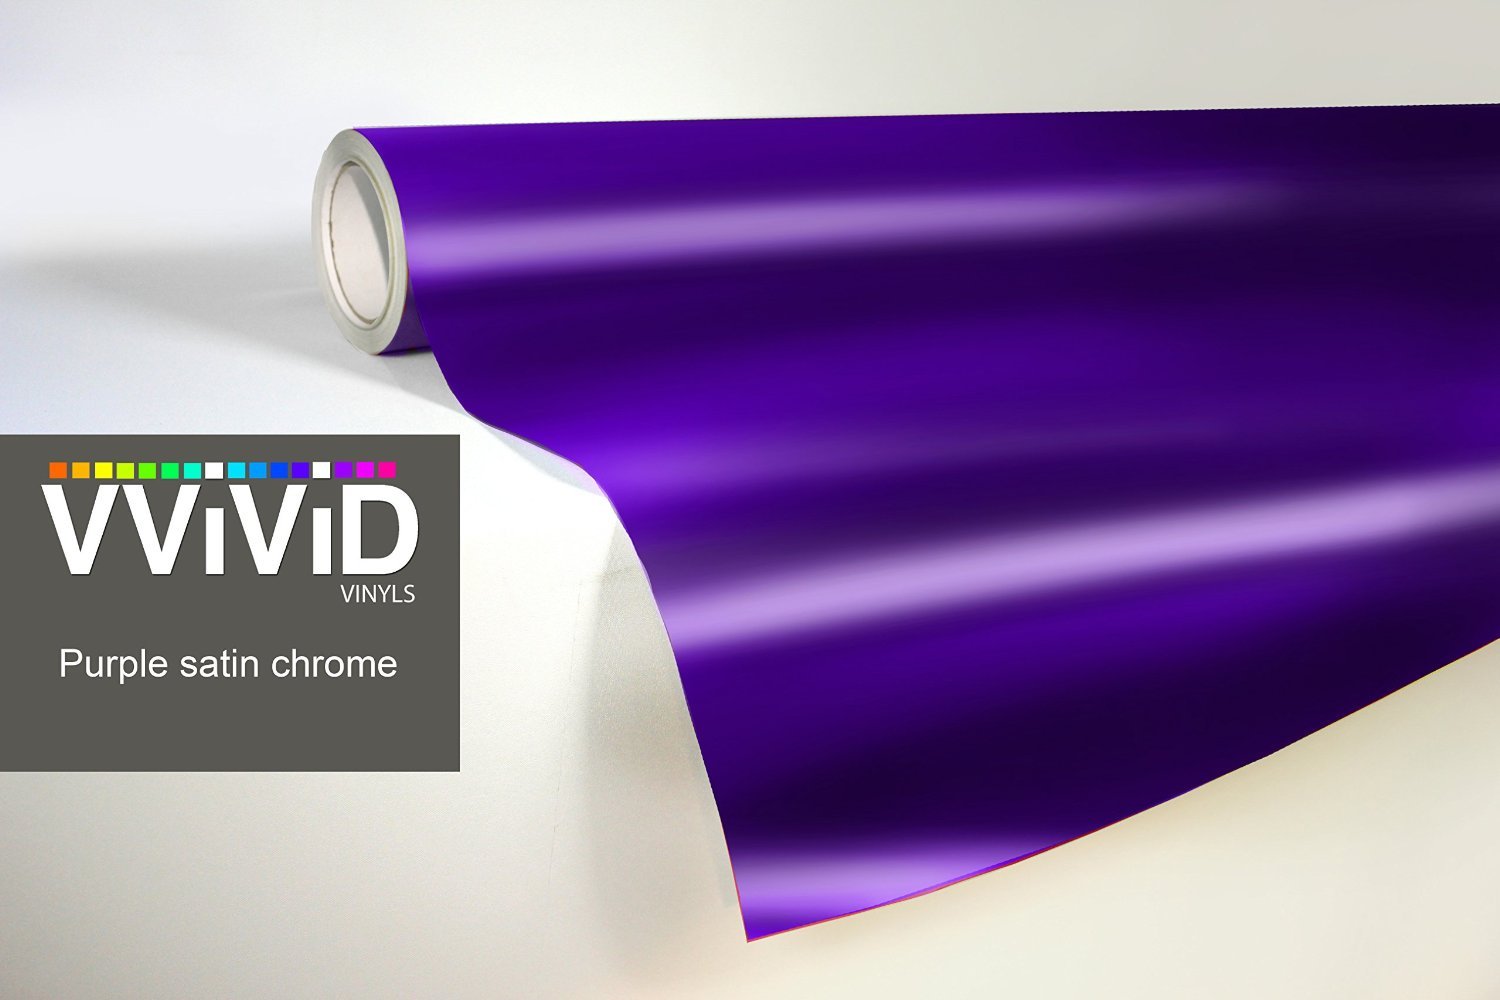 Purple Satin Chrome Conformable Stretch Vinyl Wrap Roll with VViViD XPO Air Release Technology - 1ft x 5ft